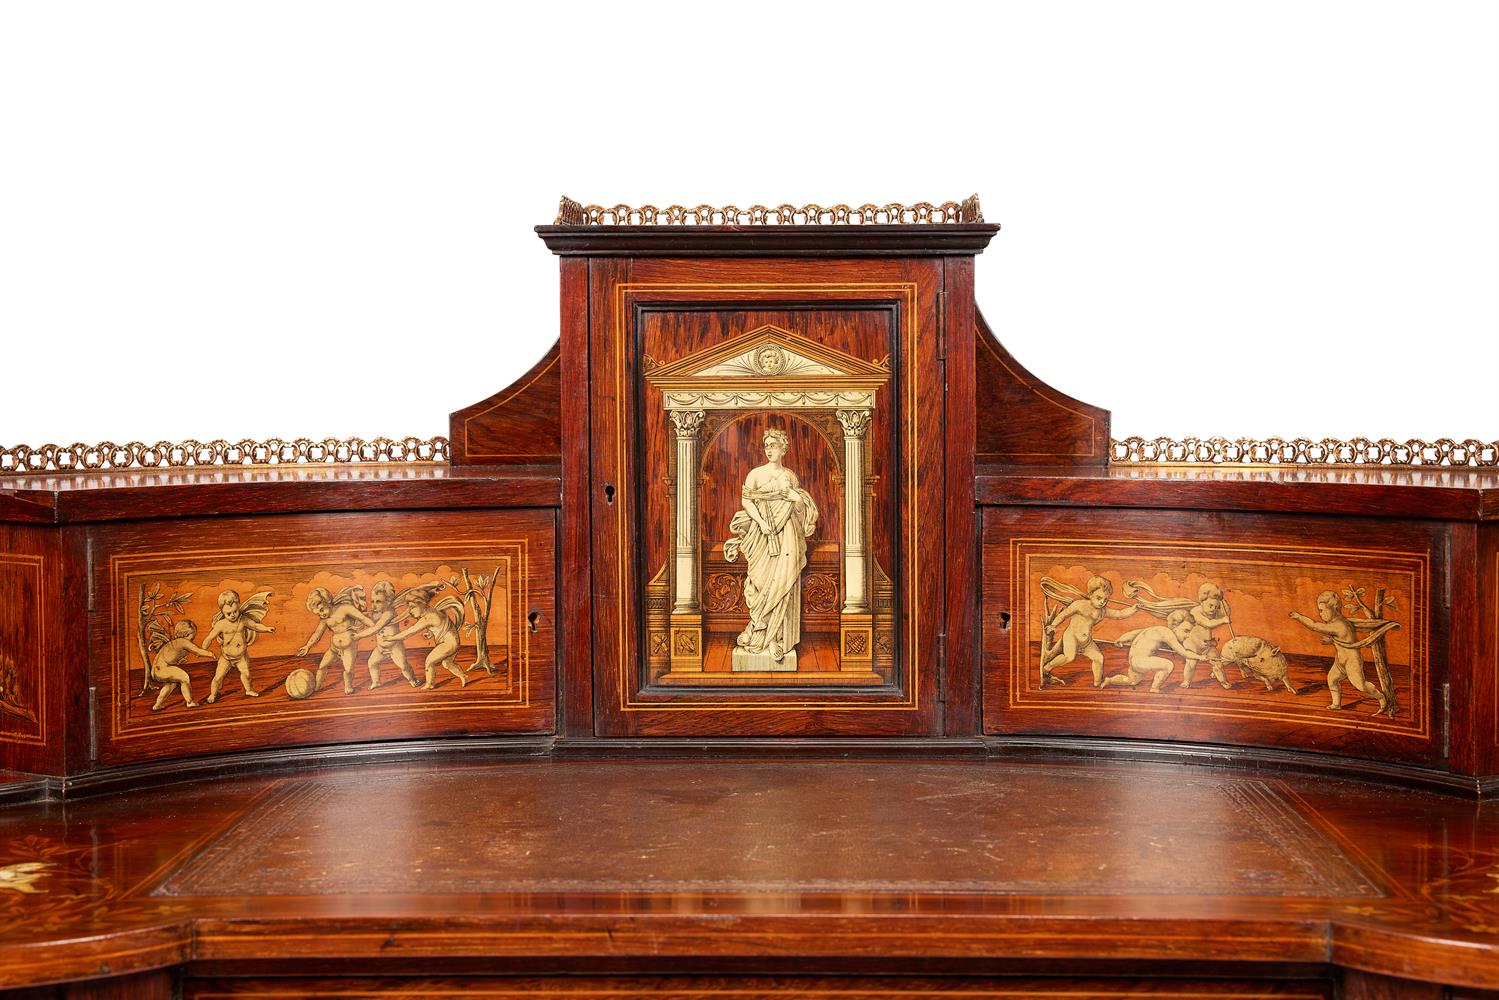 Y A LATE VICTORIAN ROSEWOOD AND IVORY MARQUETRY KIDNEY SHAPED DESK - Image 2 of 8